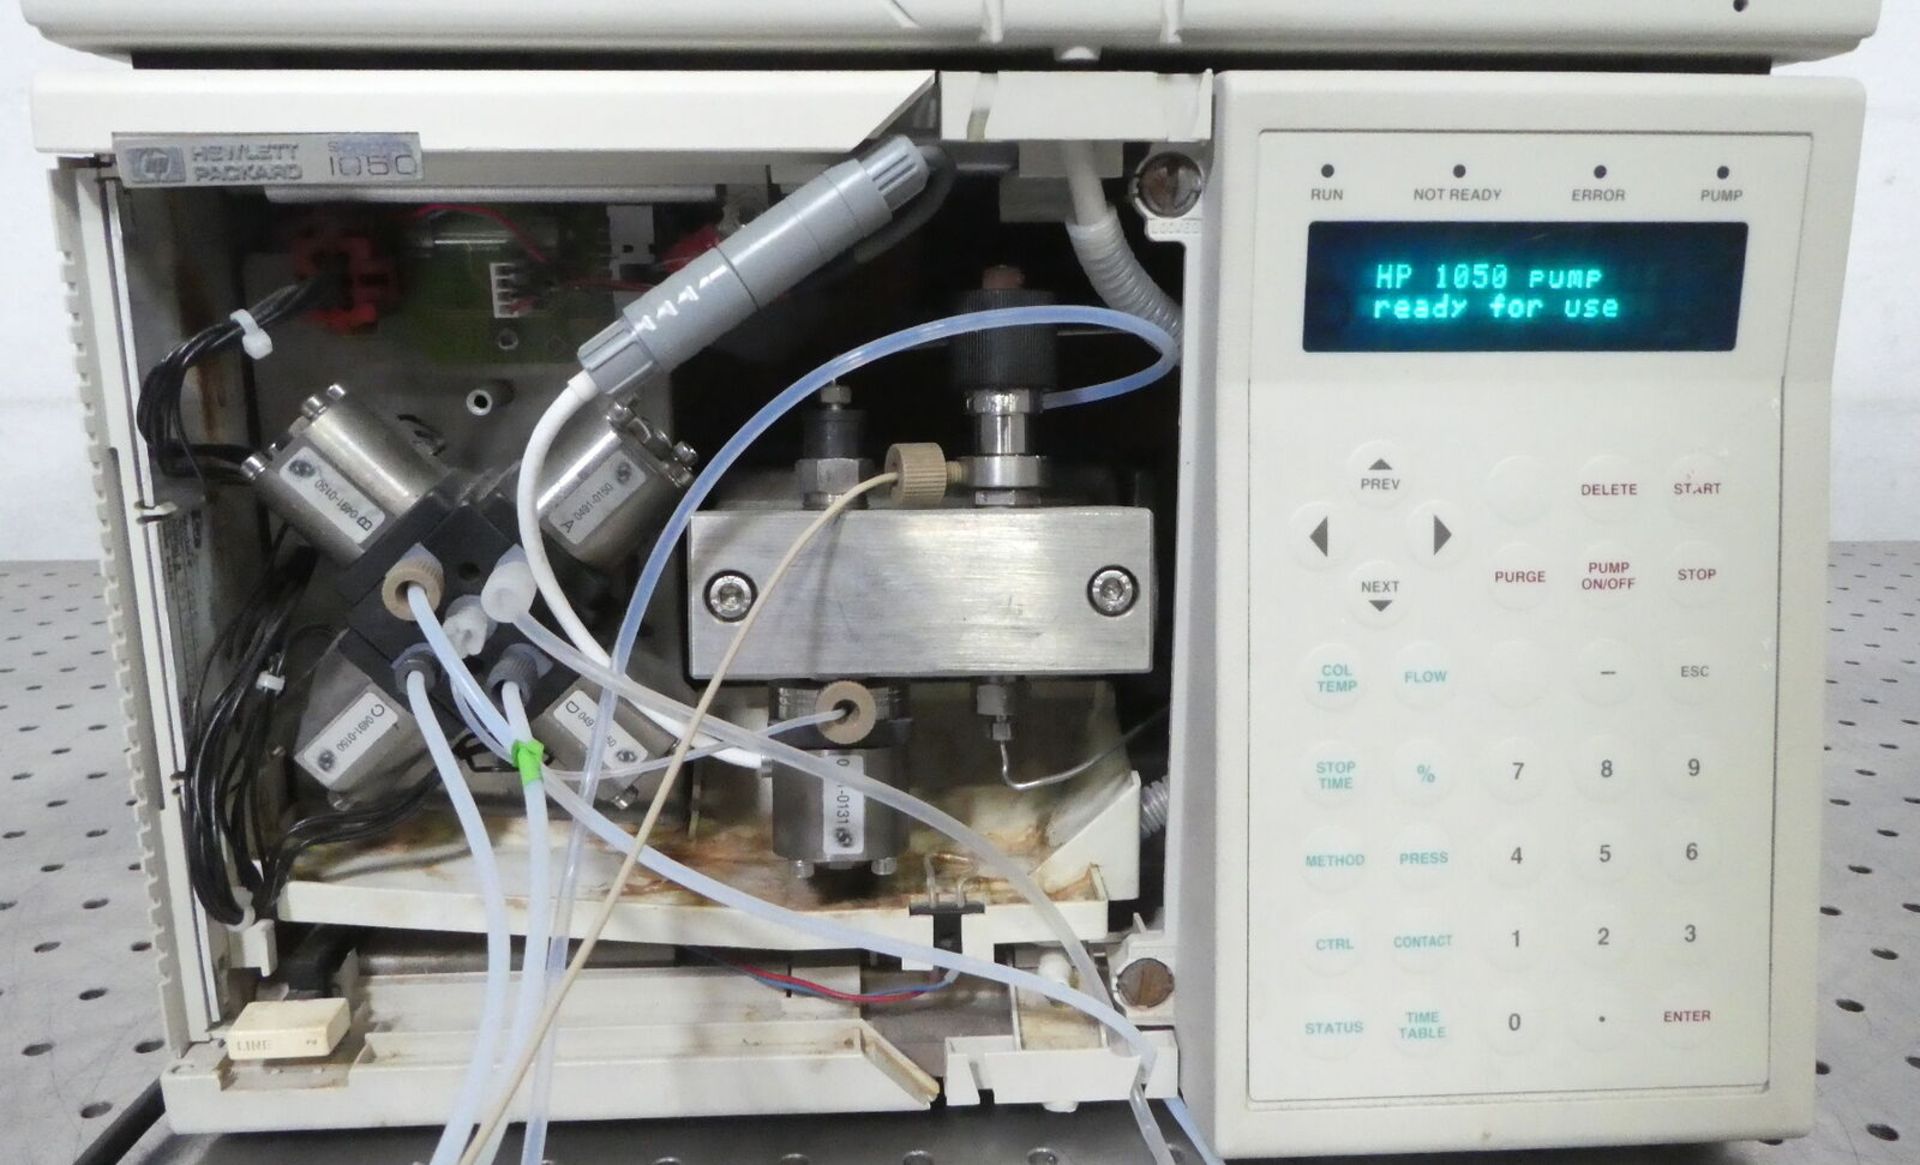 HP 1050 Series 79856A Chromatography HPLC Pump - Image 2 of 10